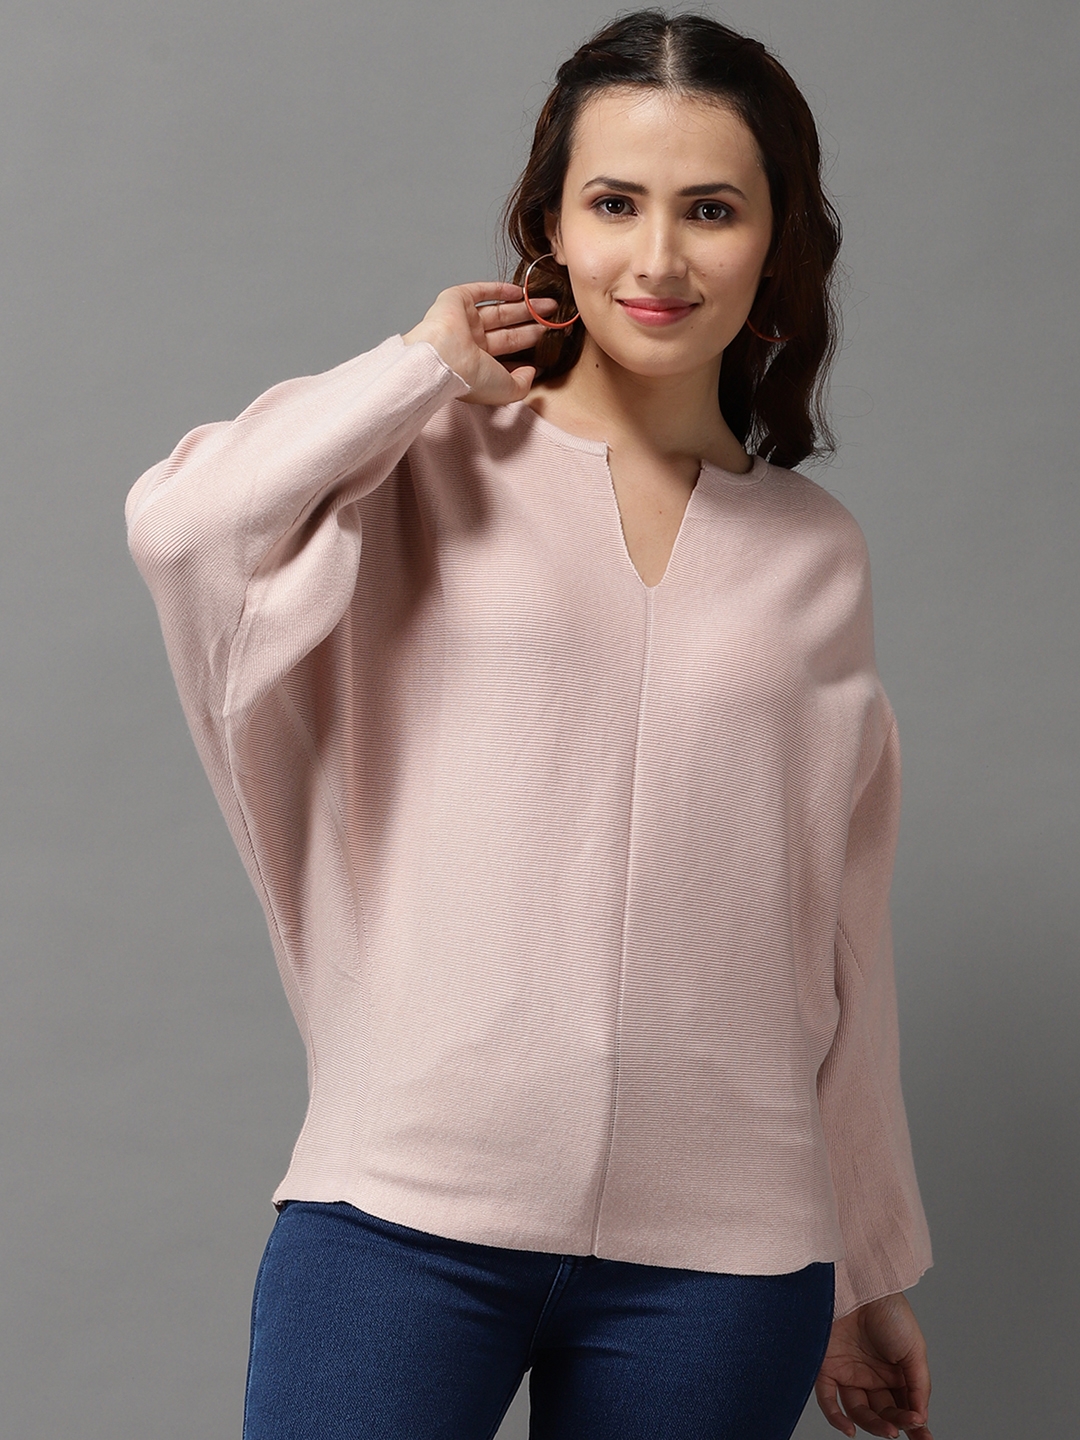 Women's Pink Acrylic Solid Sweaters